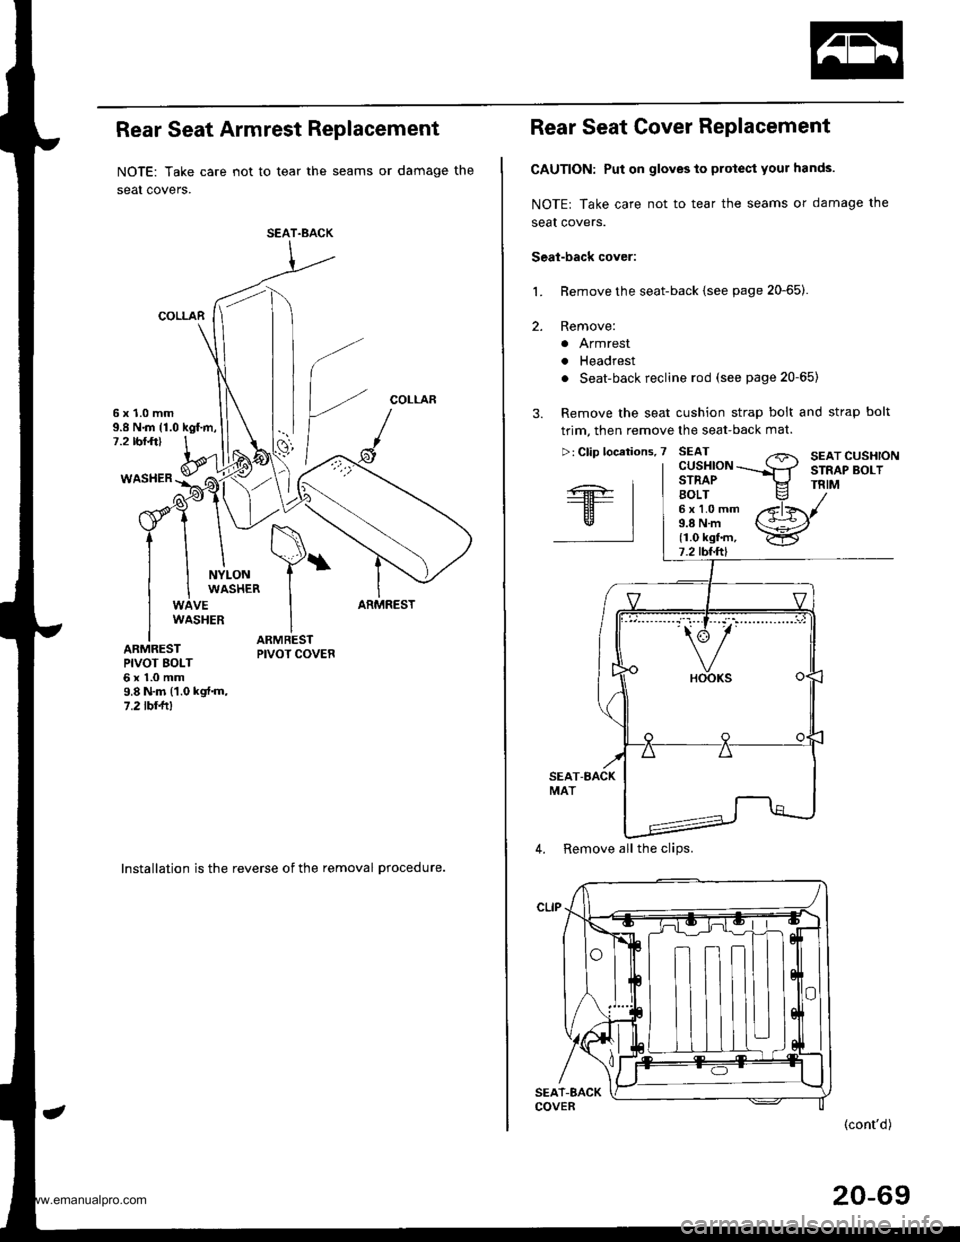 HONDA CR-V 1998 RD1-RD3 / 1.G Workshop Manual 
Rear Seat Armrest Replacement
NOTE: Take care not to tear the seams or damage the
seat covers.
COLLAR
COLLAR6x1.0mm9.8 N.m {1.0 kgf.m,7.2 rbr.ft)
WASHER
NYLONWASHER
VEARMRESTWASHER
ARMRESTPIVOT BOLT6